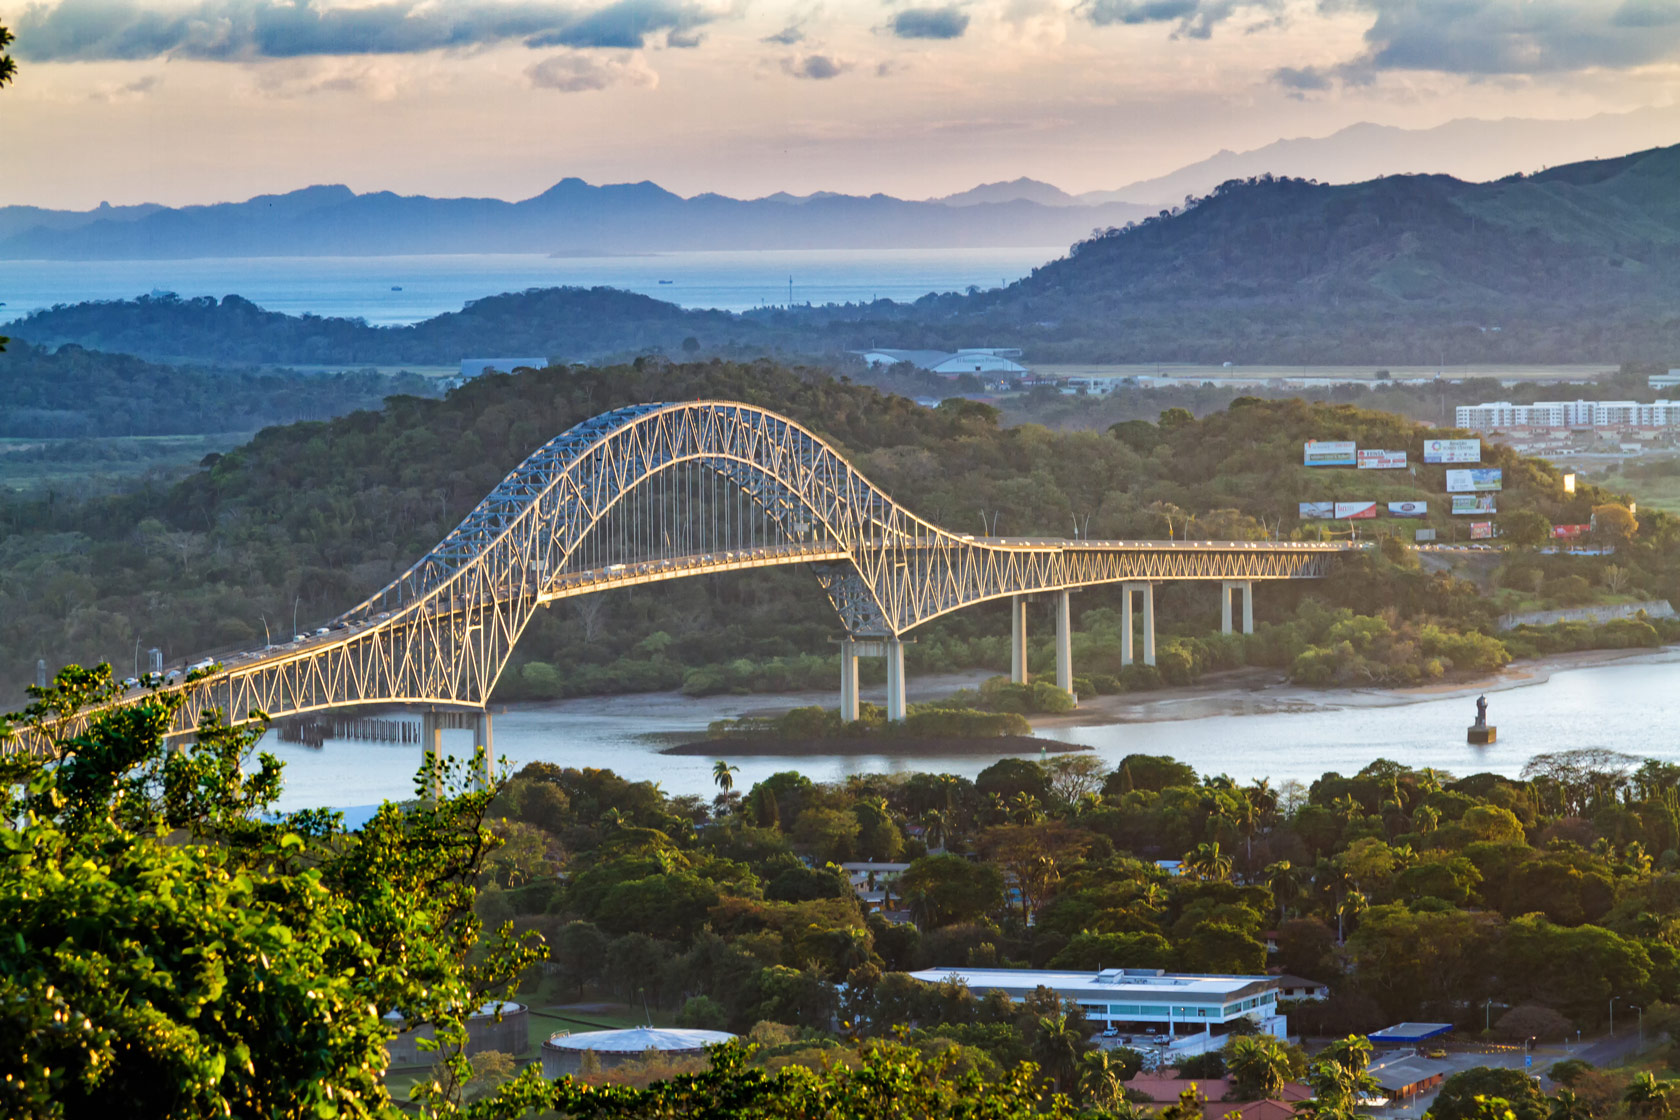 Panoramic aerial view of the Bridge of The Americas over the Panama Canal Pacific Entrance. Sunset scene with a gentle mist in the background. The bridge is spanning two continents - two Americas.